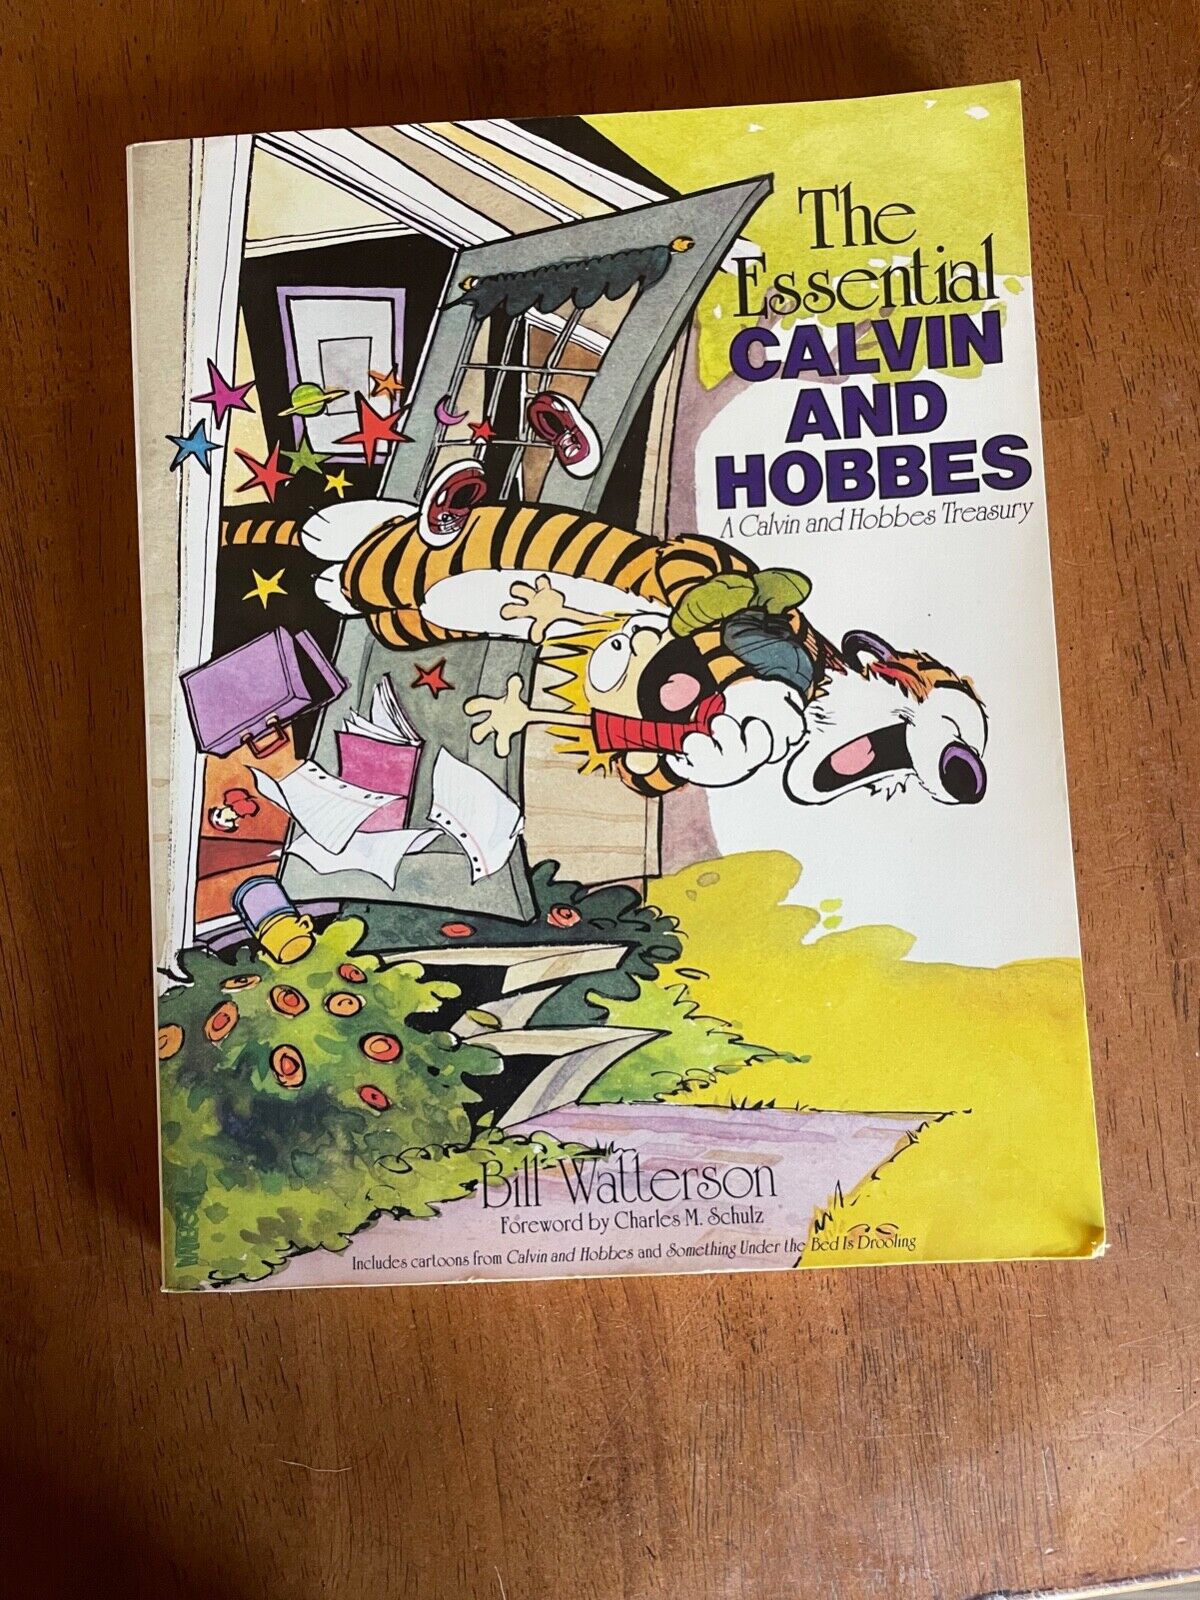 The Essential Calvin and Hobbes - A Calvin and Hobbes Treasury